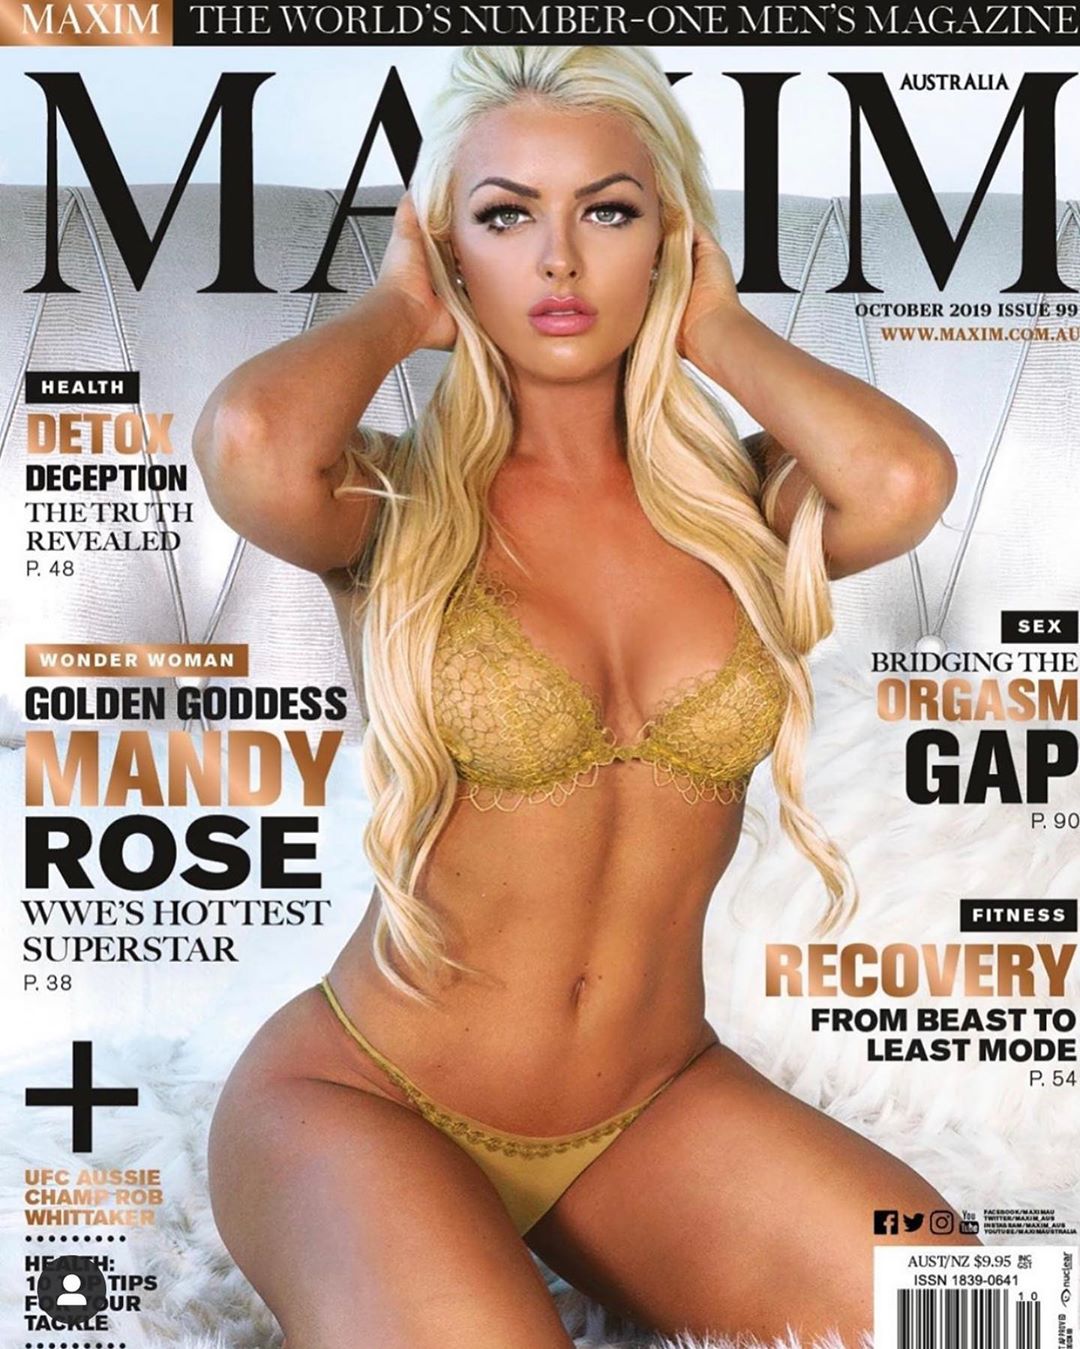 Mandy Rose Hot to read